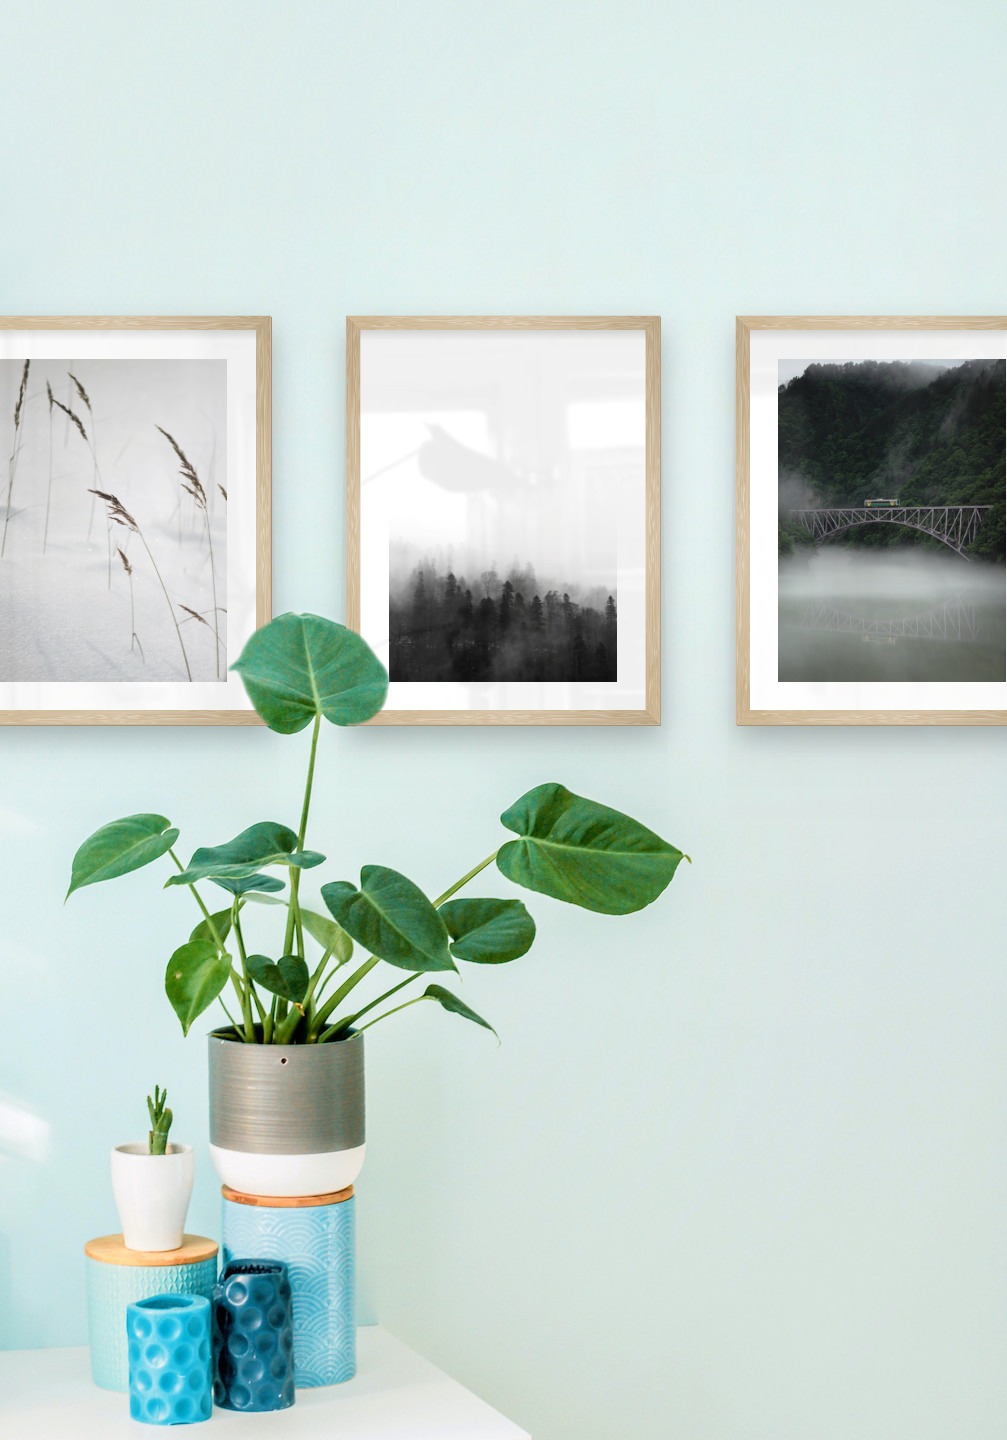 Gallery wall with picture frames in wood in sizes 30x40 with prints "Sharp in the snow", "Foggy wooden tops" and "Train over bridge"